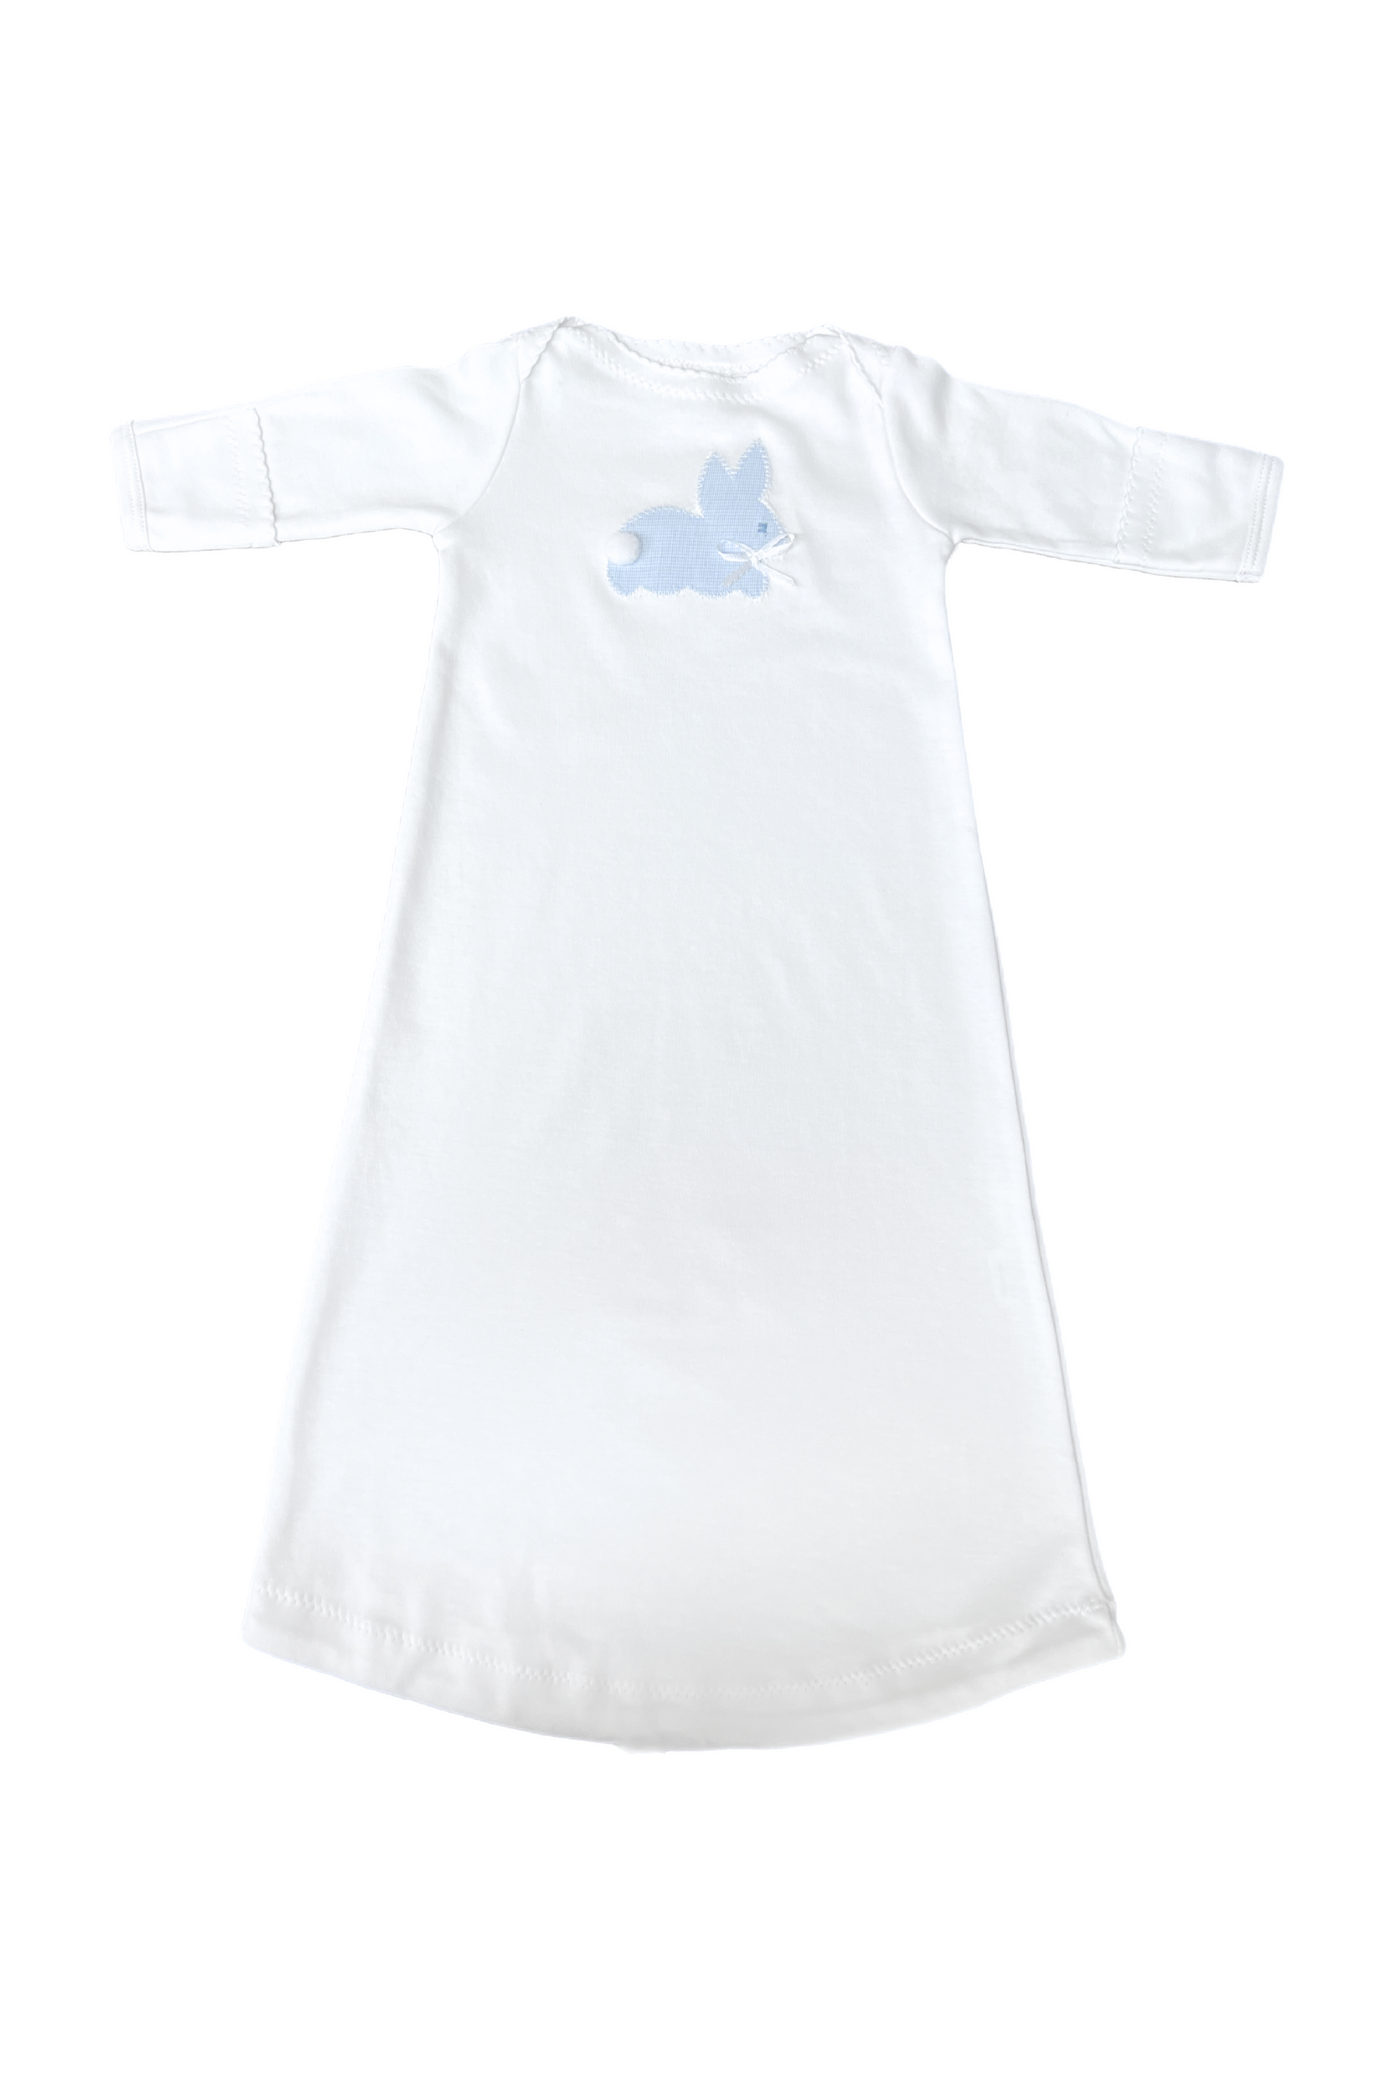 JJ Applique Day Gown Blue Micro Gingham Bunny